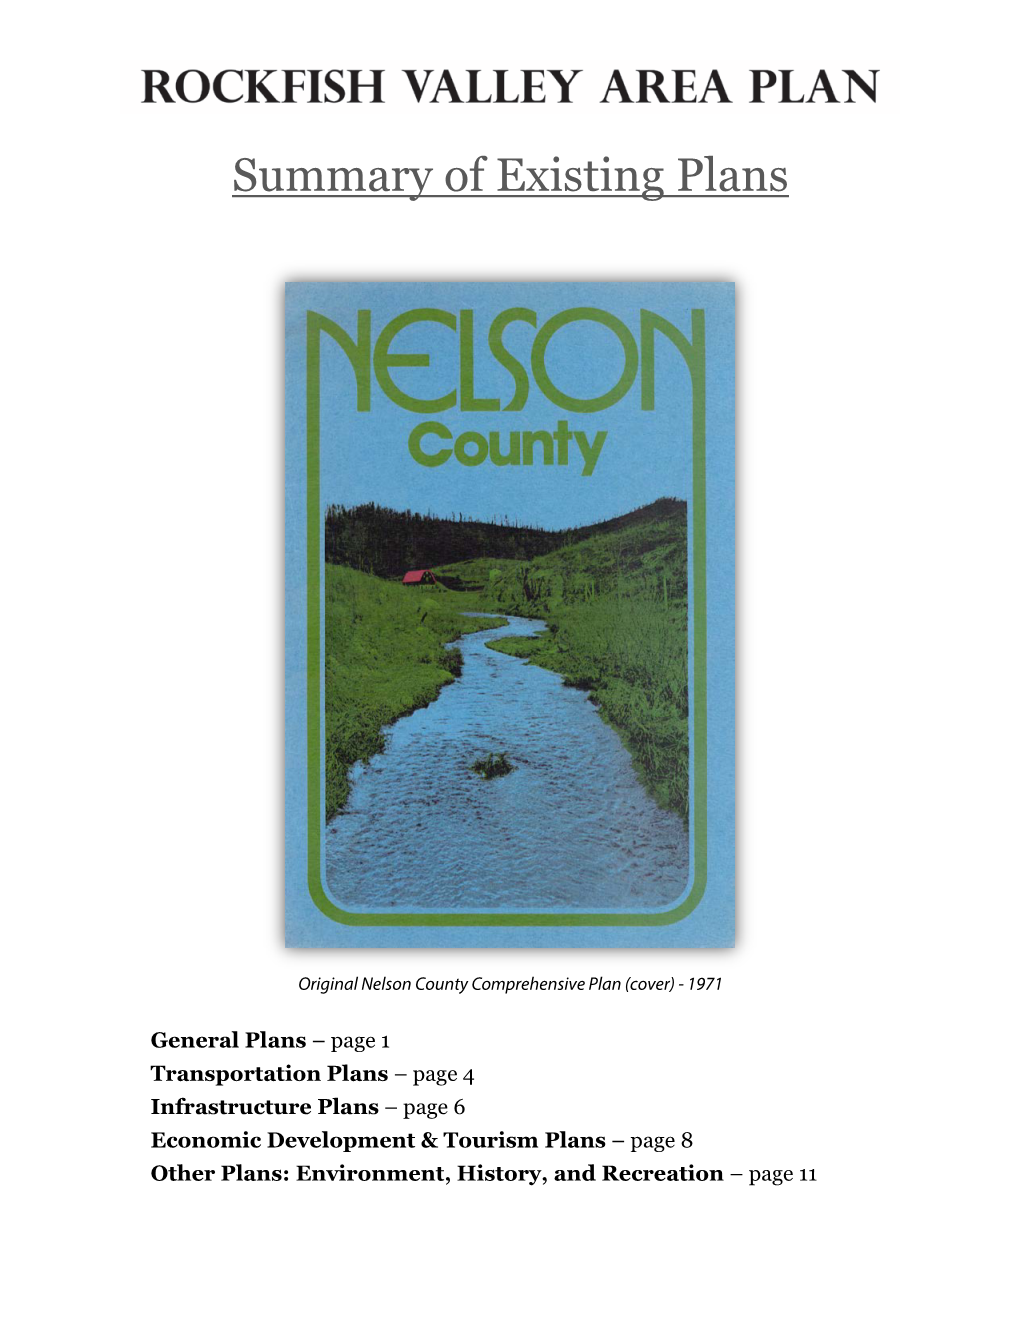 Summary of Existing Plans